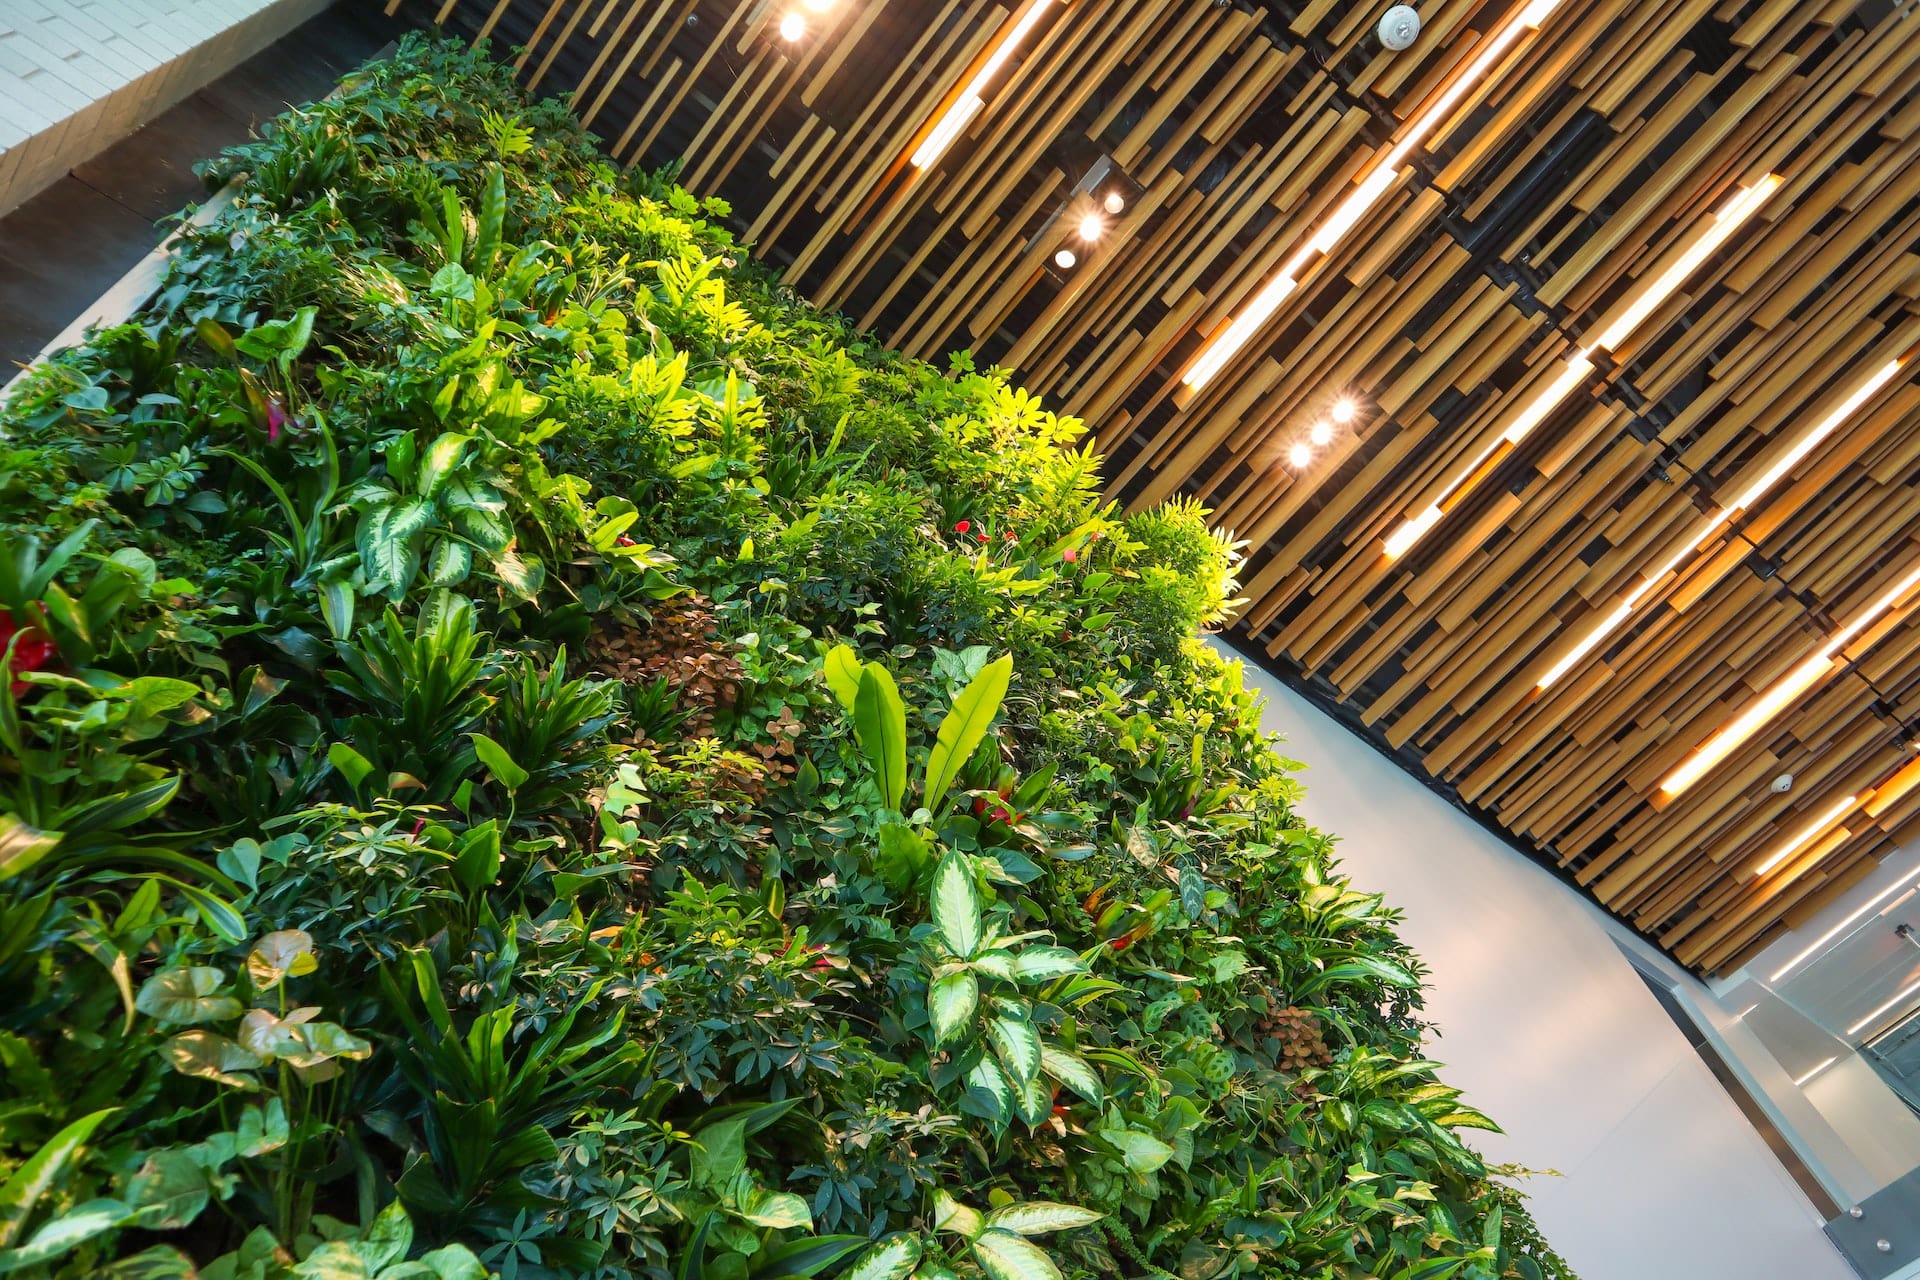 An upwards view of a green plant wall in an office space with wooden slats as the ceiling